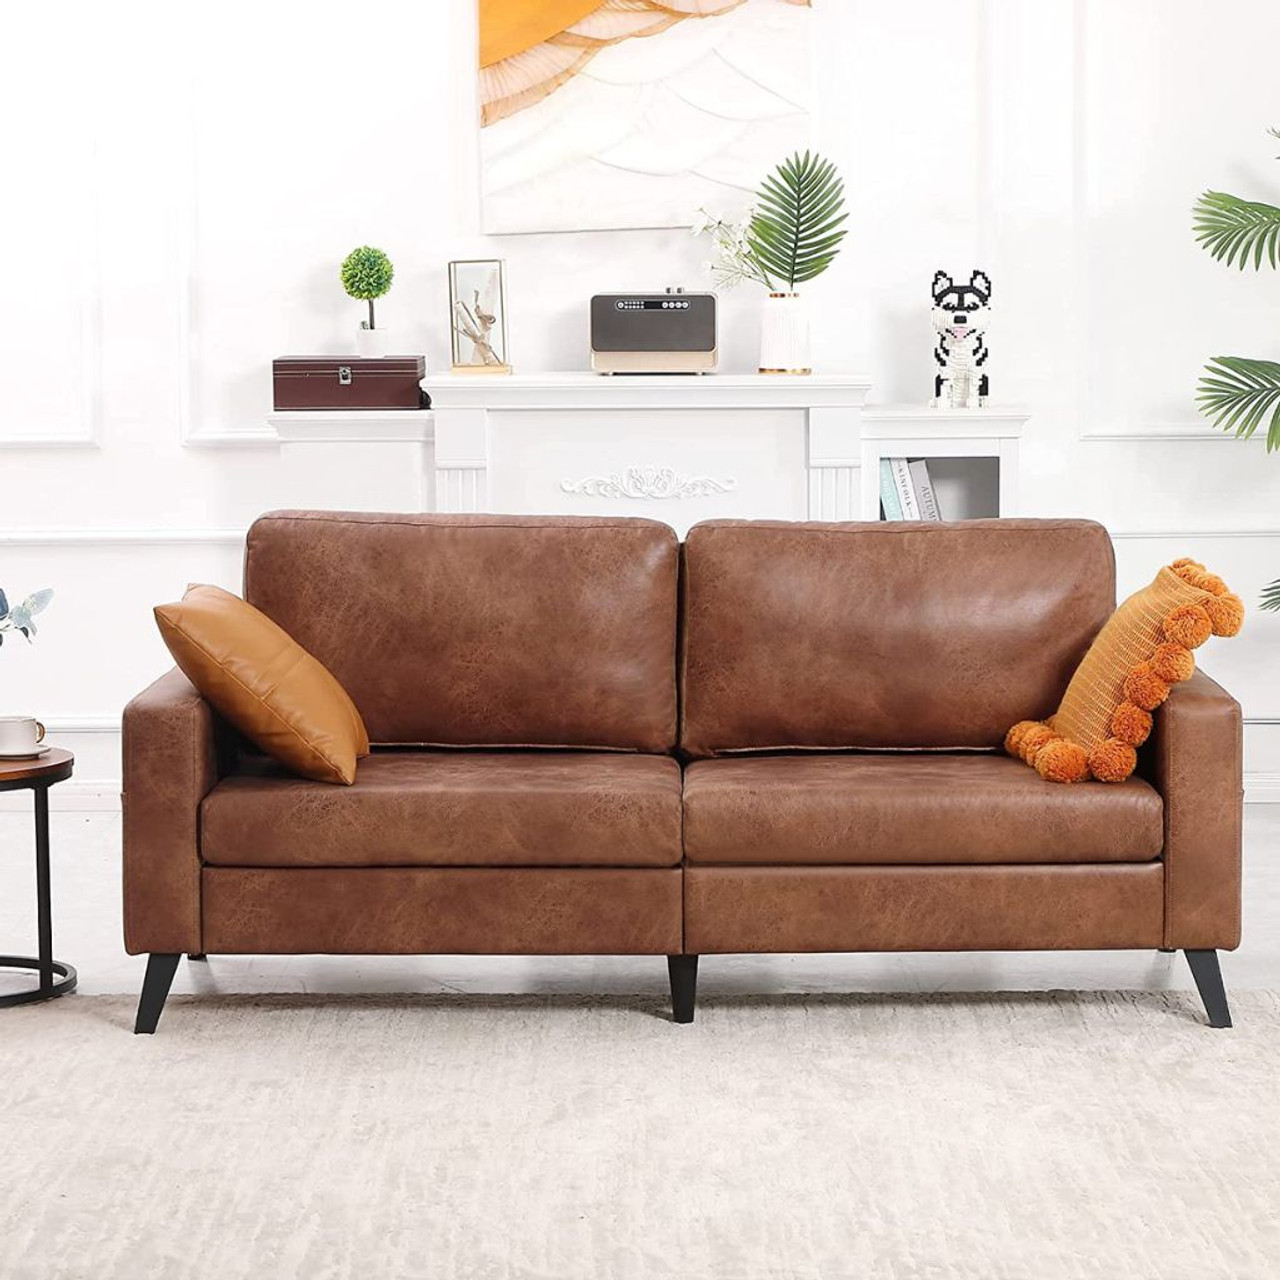 79-Inch Mid-Century Modern Loveseat Couch product image